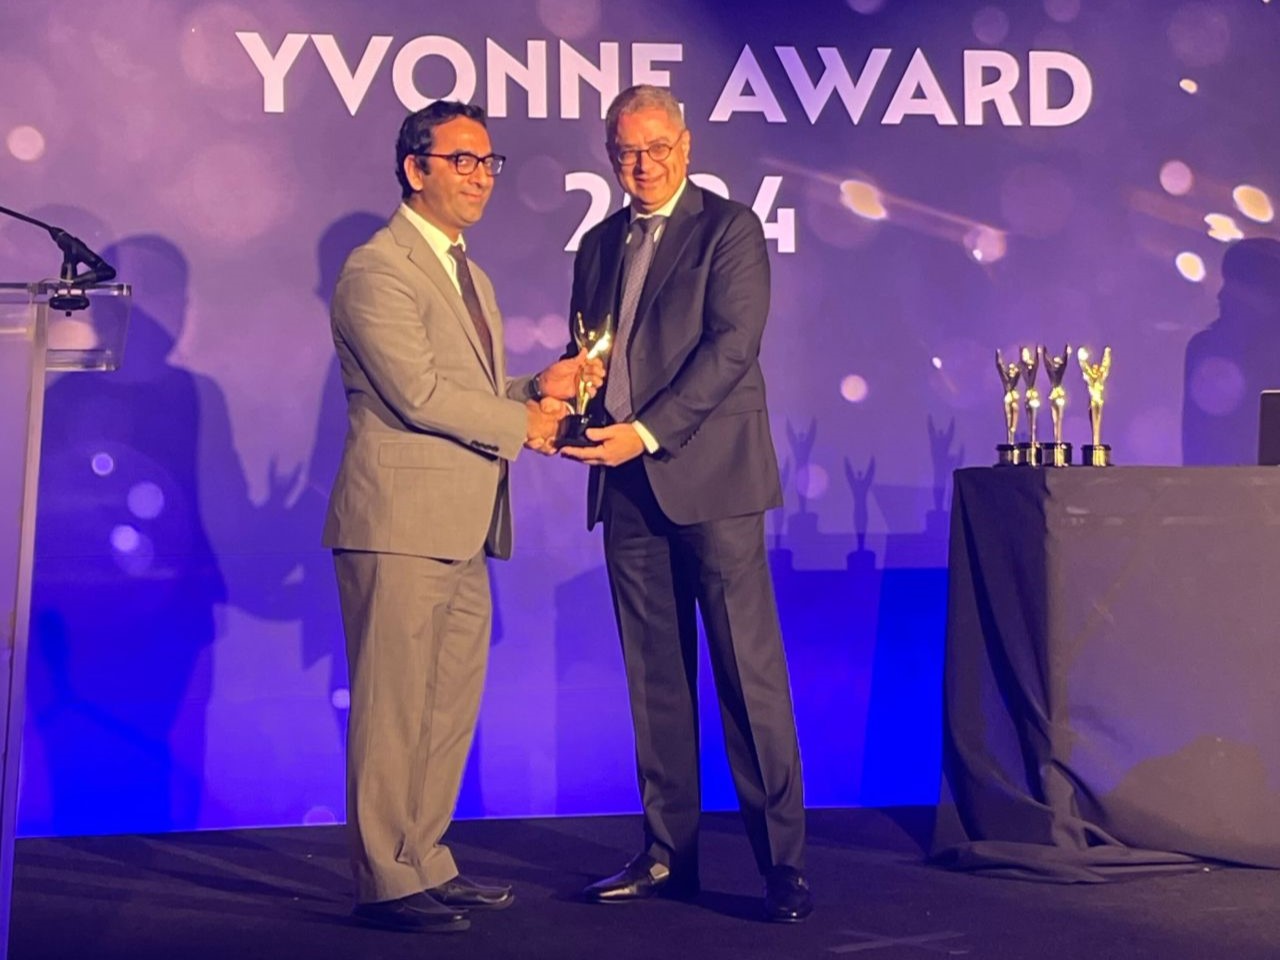 Congratulations to Dr. Pashtoon Kasi on receiving the Yvonne Award from OncoDaily – Agenus